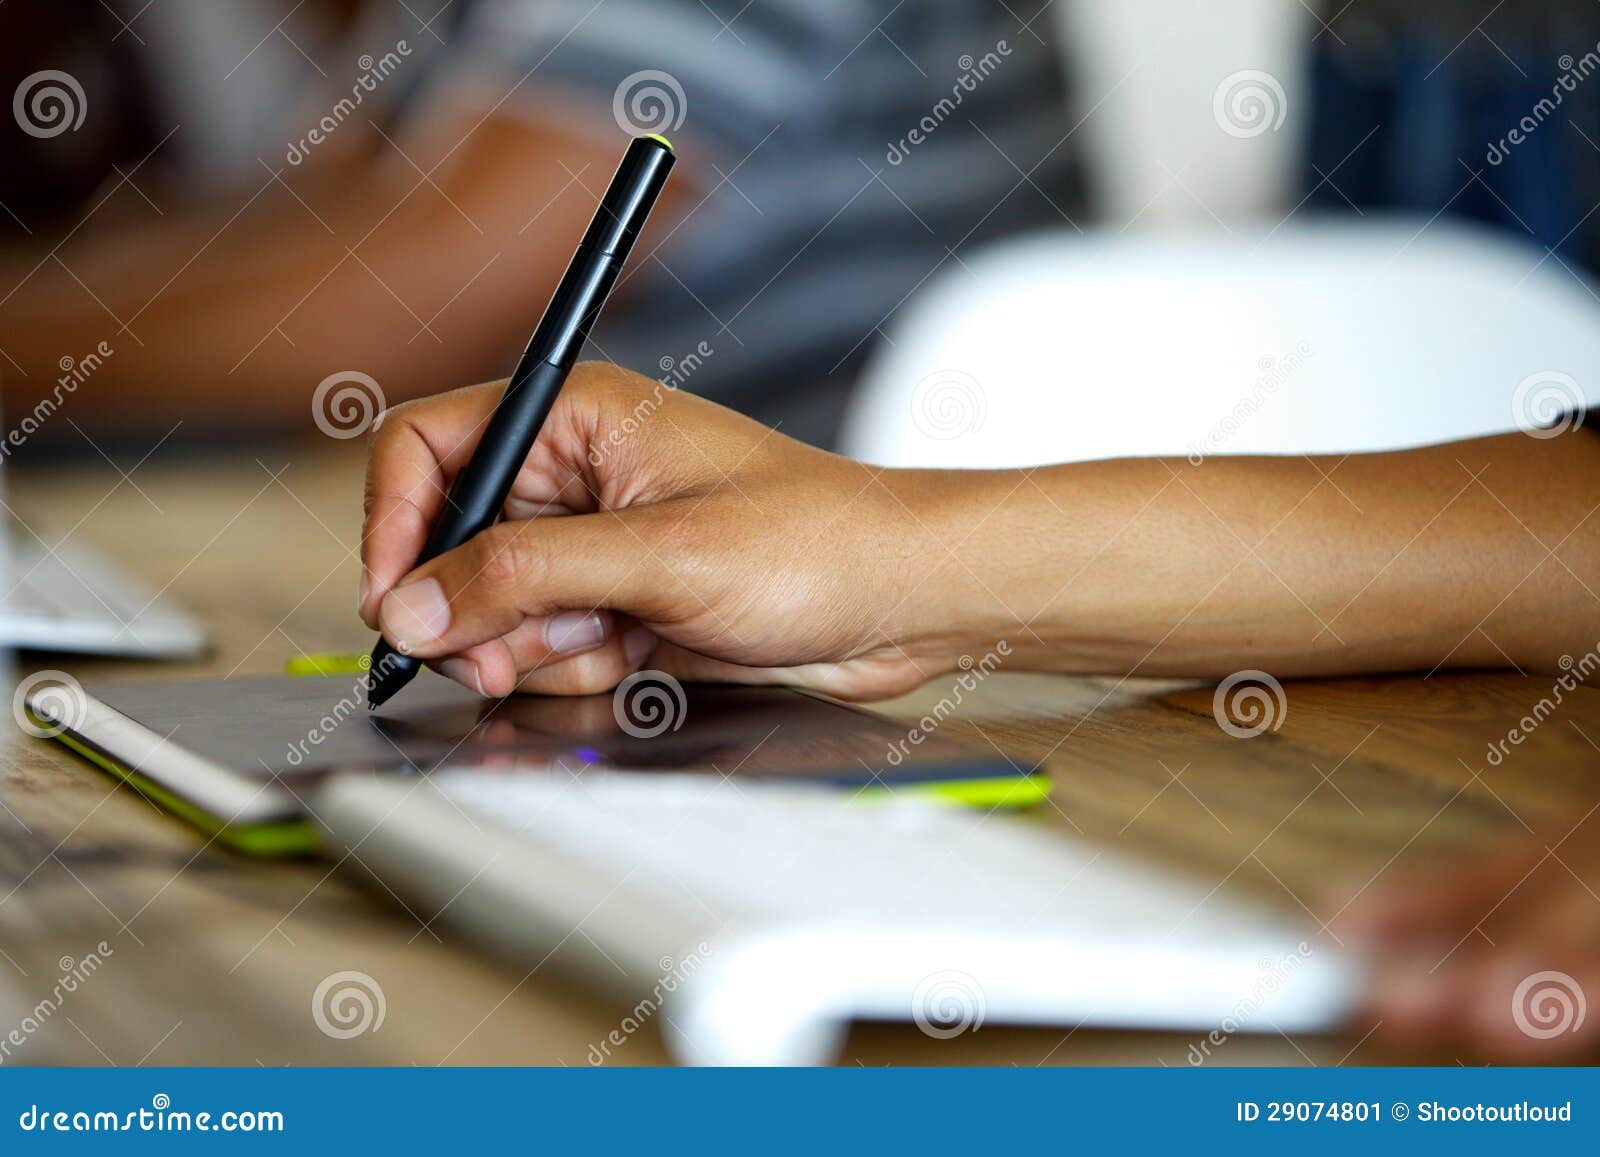 Graphic designer using tablet. Hand of a graphic designers while using a stylus.